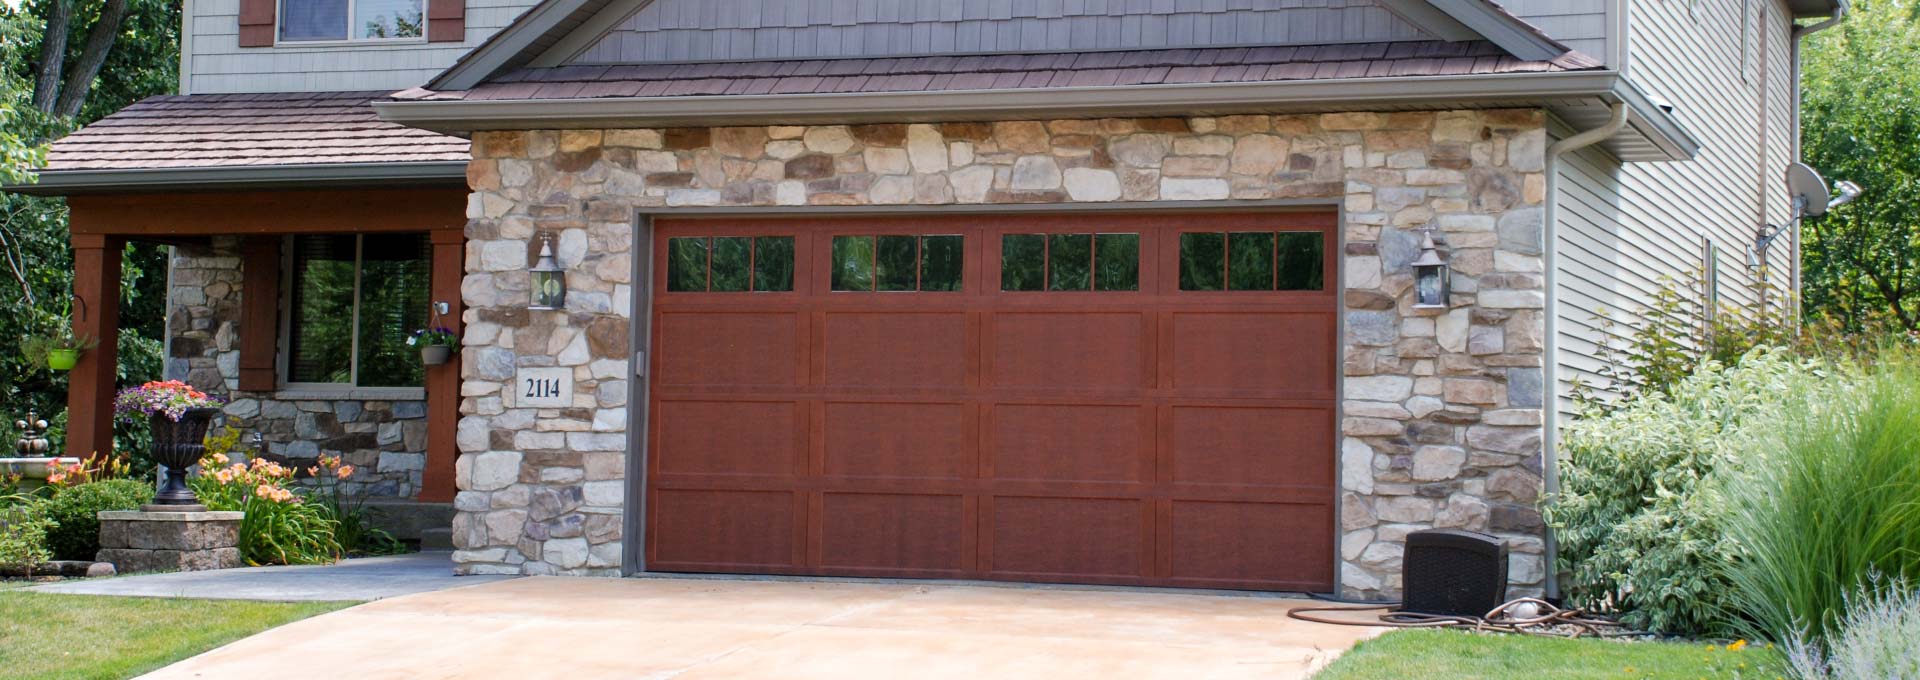 Distinctive maintenance free Carriage House designs available in stained and painted finishes.